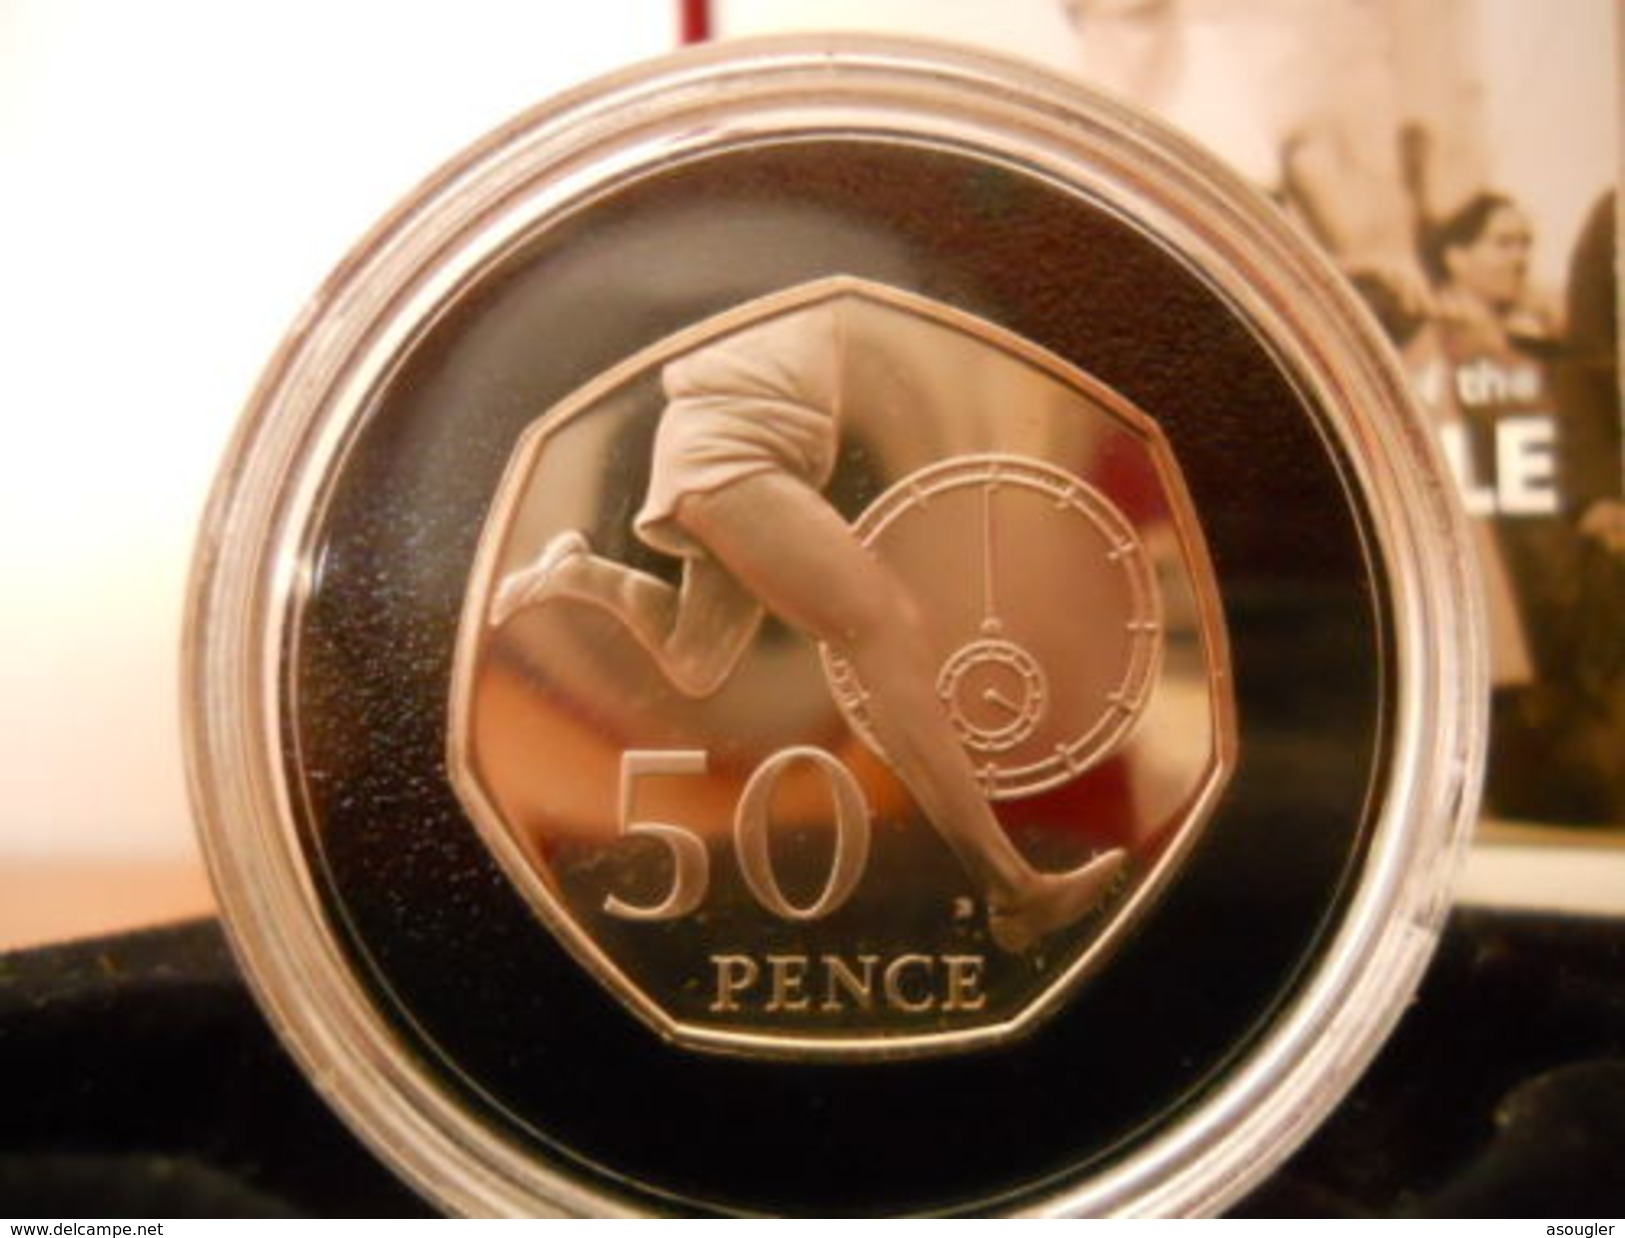 UK GREAT BRITAIN 50 PENCE 2004 SILVER PROOF "50 ANNIV. FOUR MINUTE MILE" - Maundy Sets & Gedenkmünzen